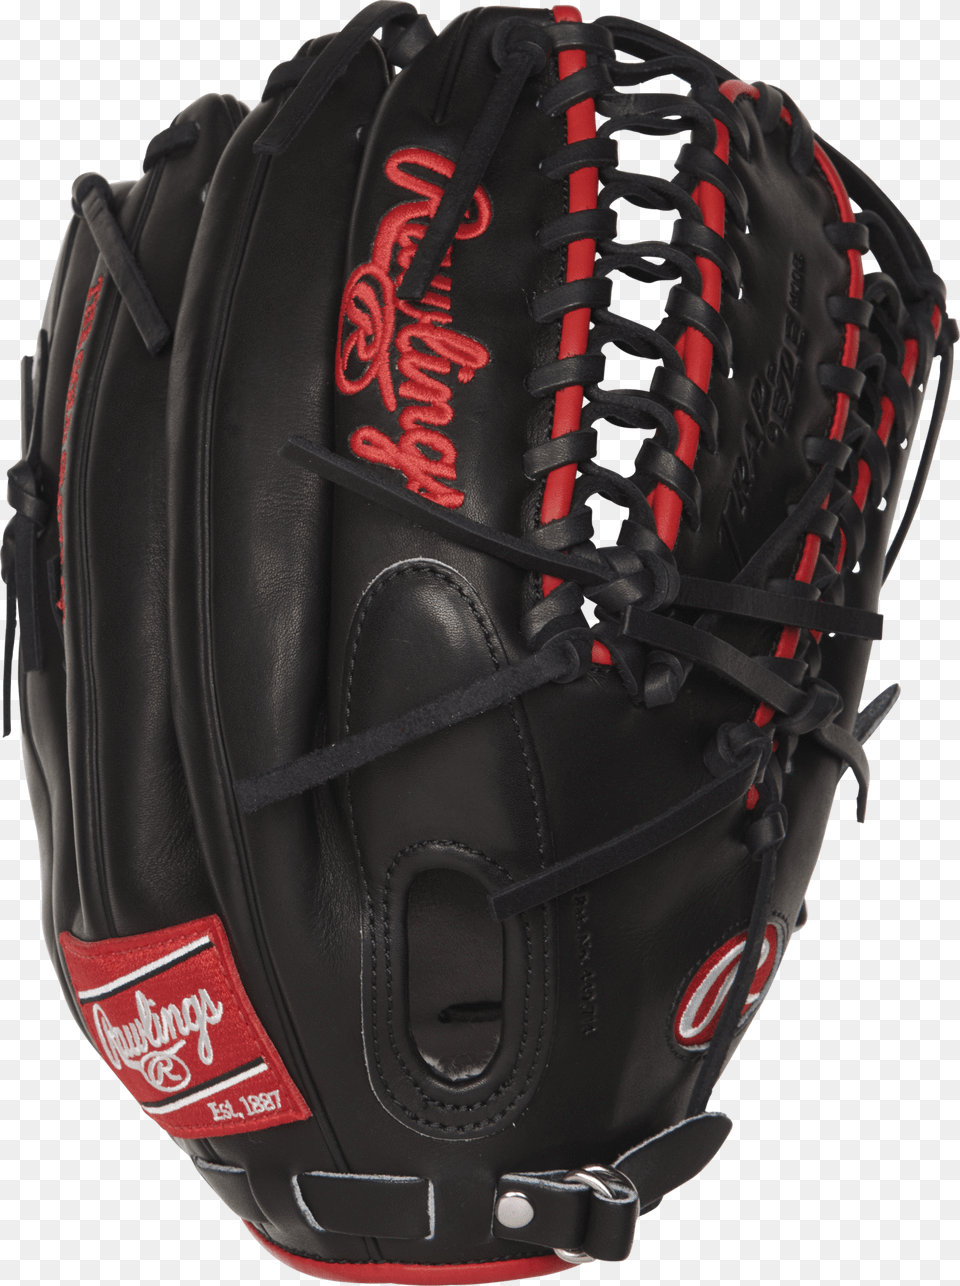 Rawlings Trapeze Outfielders Glove That Mike Trout Mike Trout Glove, Baseball, Baseball Glove, Clothing, Sport Free Transparent Png